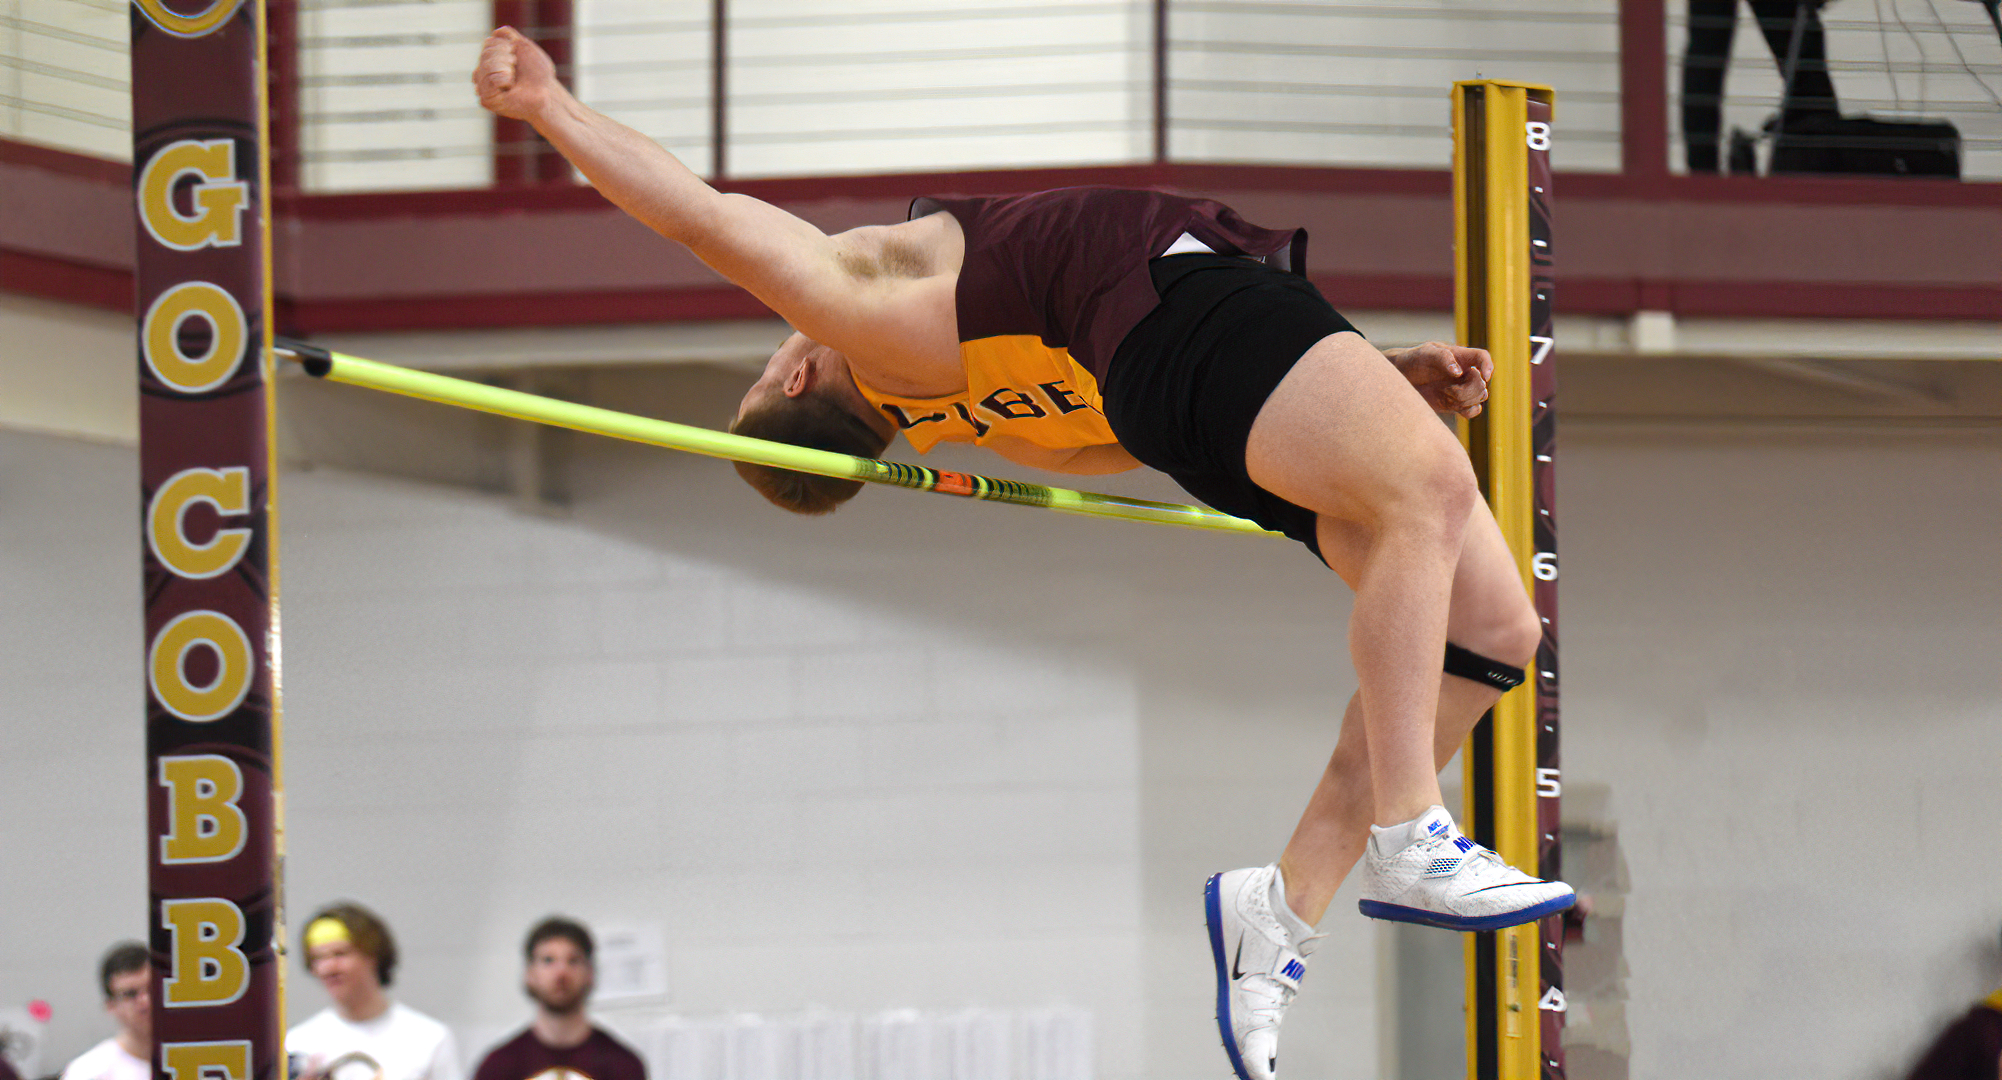 Sophomore Anthony Marsh was the top finishers for the Cobbers on Day 1 at the MIAC Meet. He placed second in the high jump.